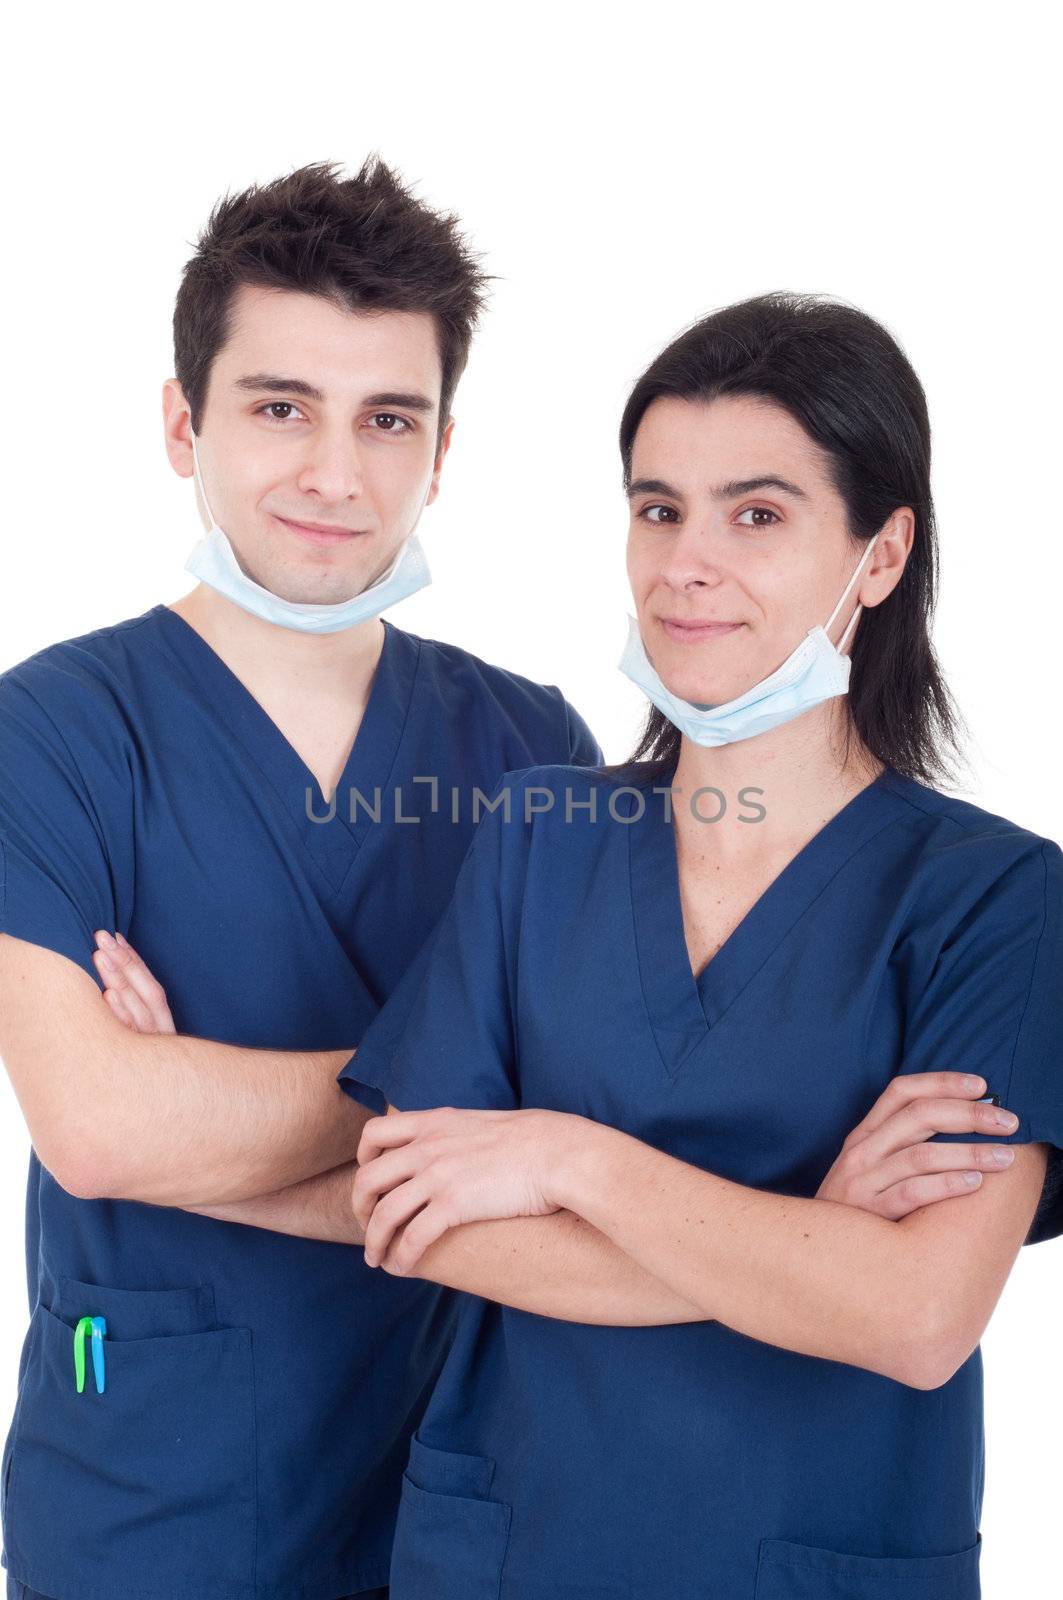 portrait of a team of doctors, man and woman wearing mask and uniform isolated on white background